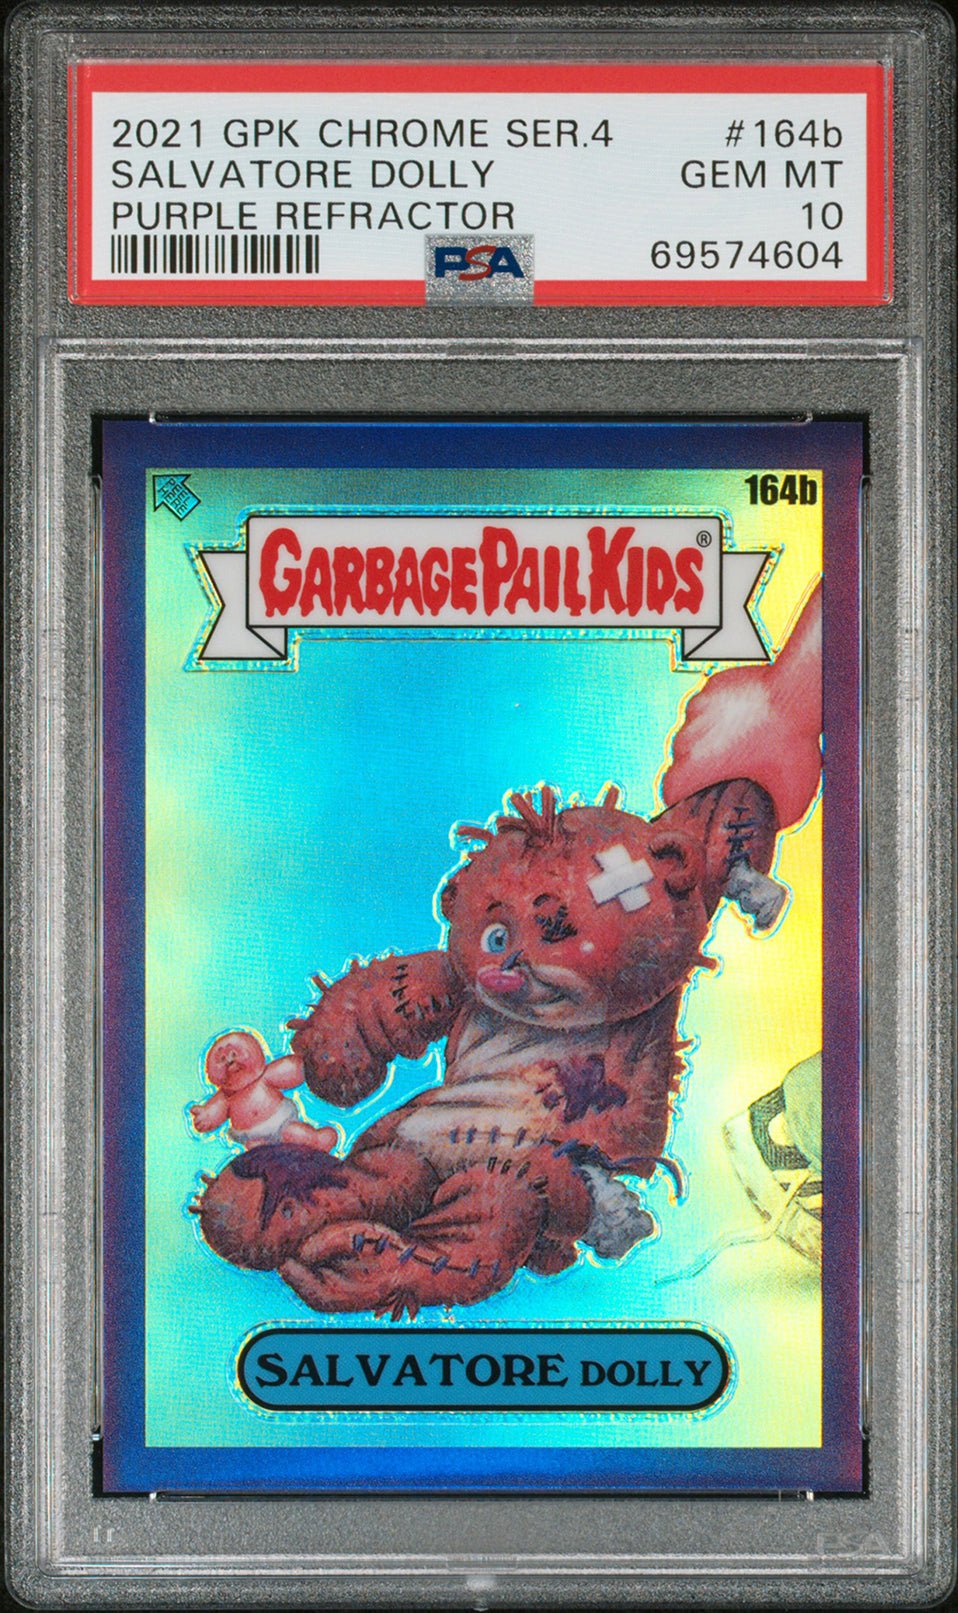 SALVATORE DOLLY PSA 10 2021 Topps Chrome Purple Refractor 164b 214/250 Garbage Pail Kids Graded Cards Parallel Serial Numbered - Hobby Gems